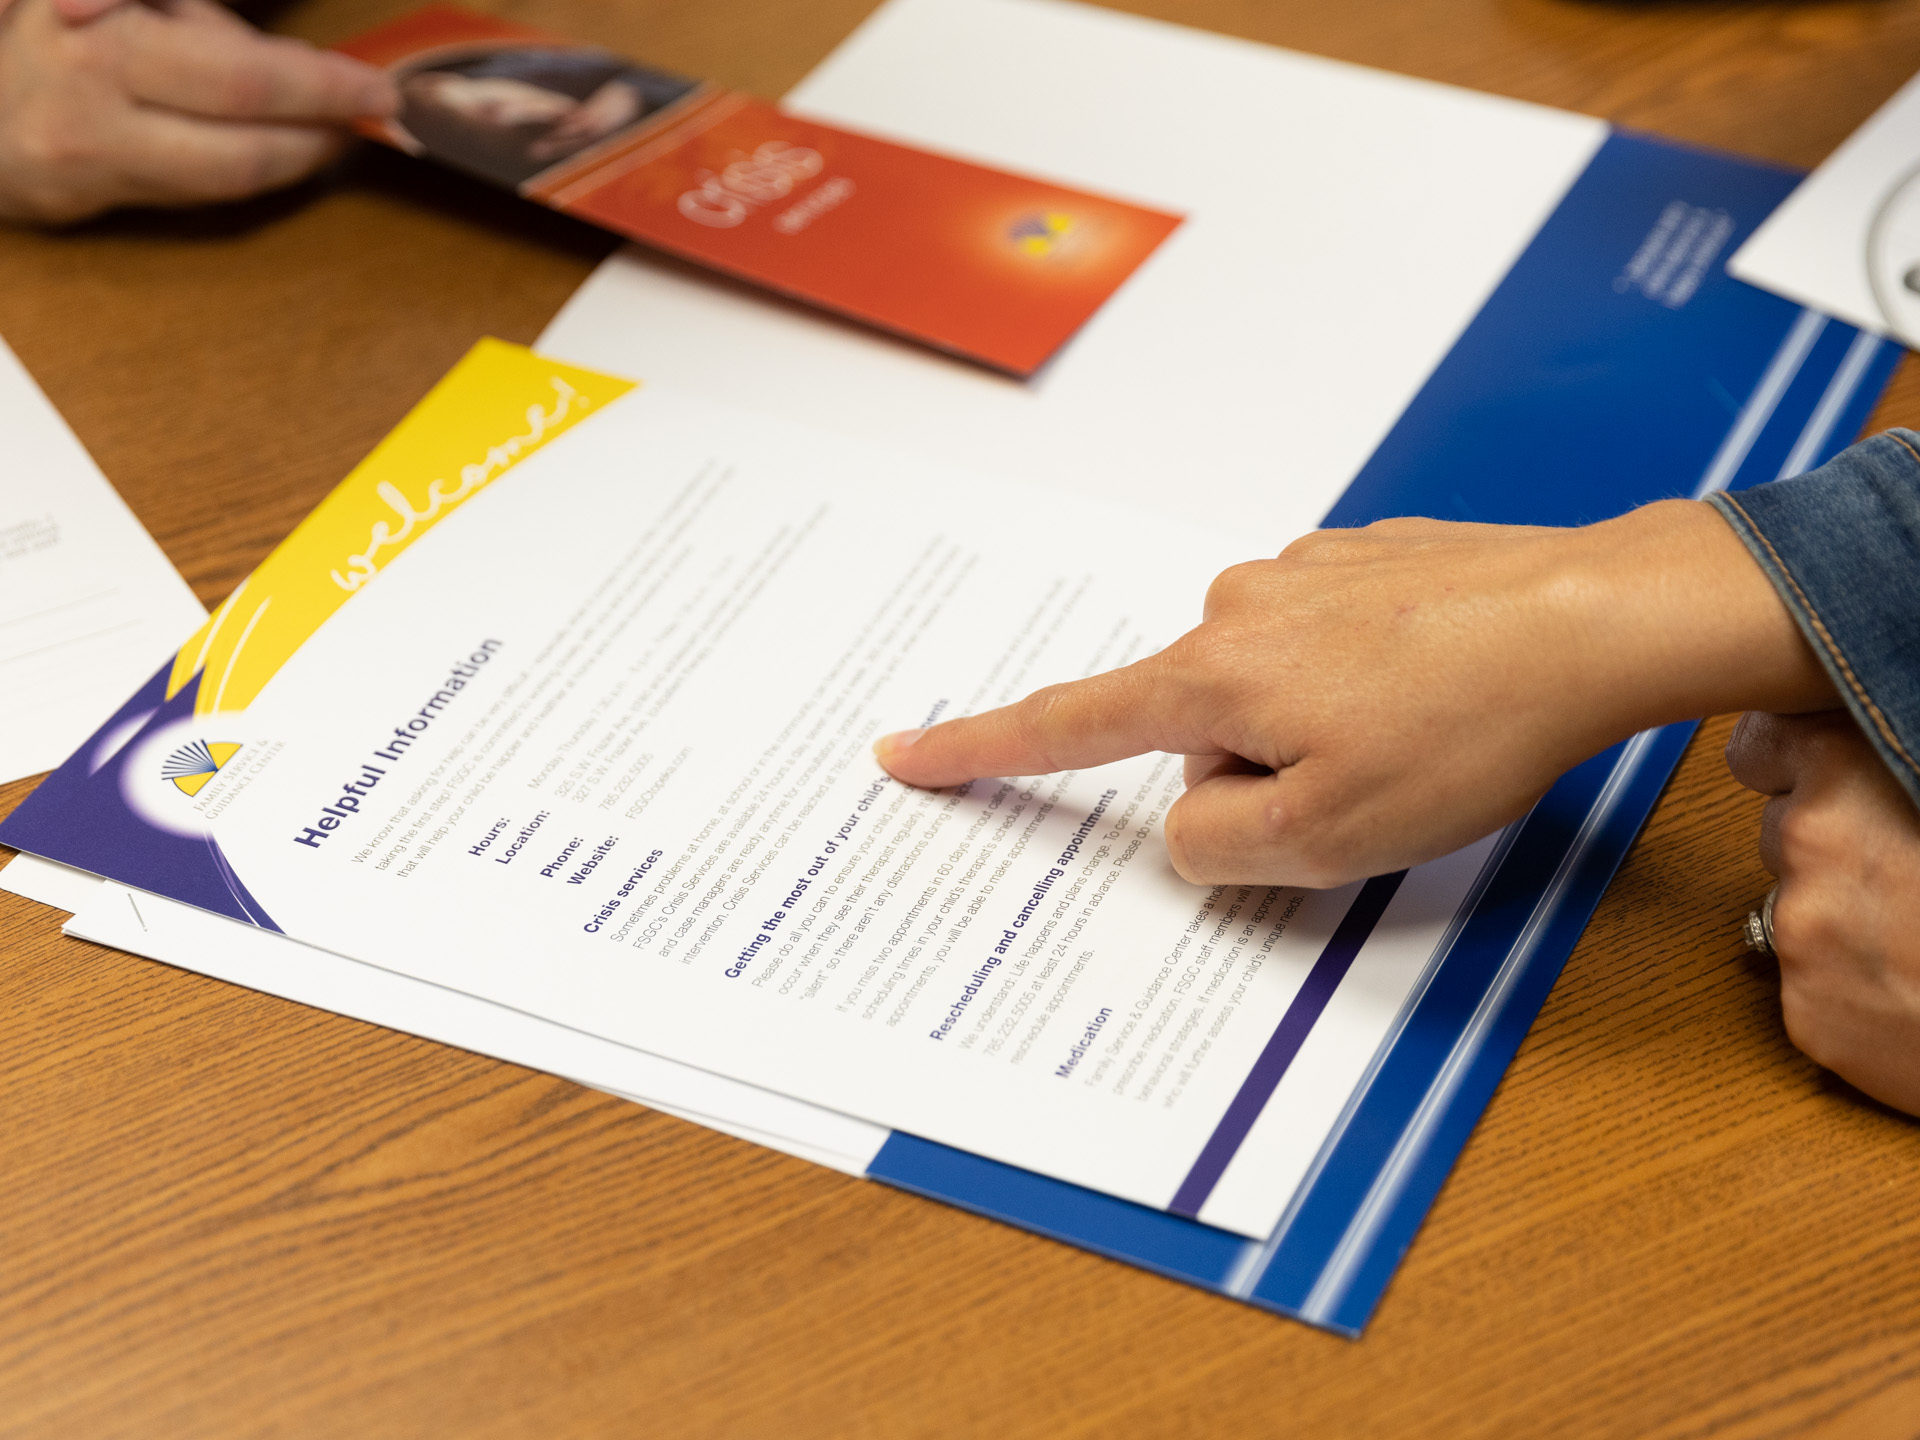 A finger points to a FSGC pamphlet that reads "Helpful Information", that lays on a wooden desk, an FSGC employee's hand can be seen on the other side.